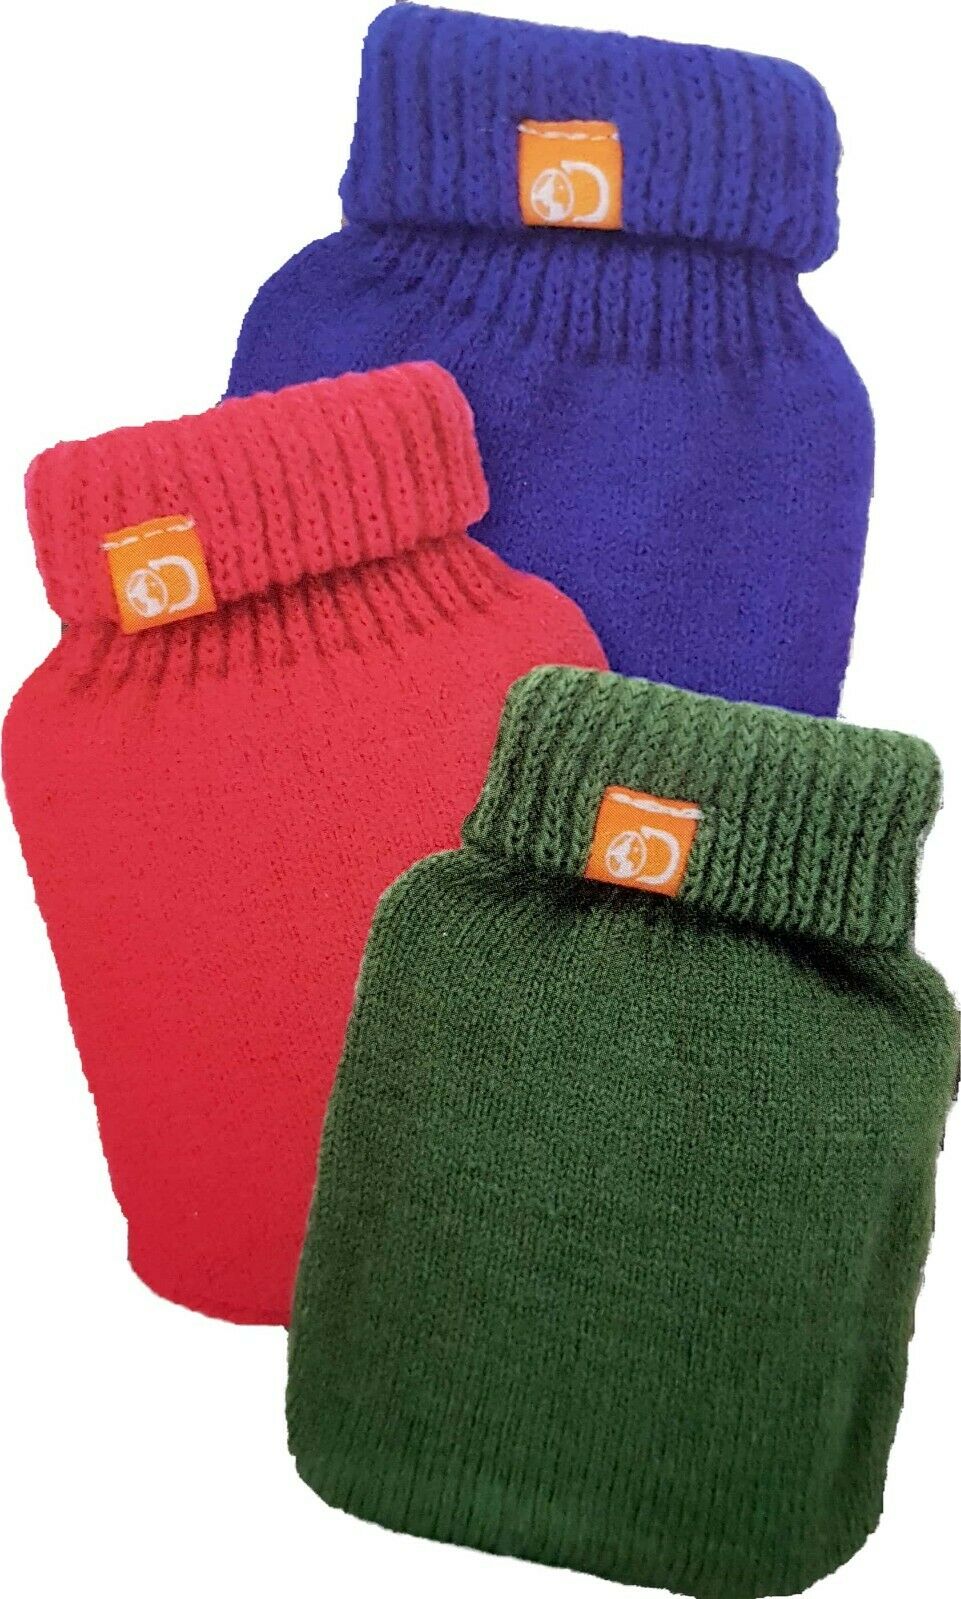 Generise Reusable Hand Warmer with Knitted Cover - TWIN PACK - Random Colour (Blue, Red or Green)